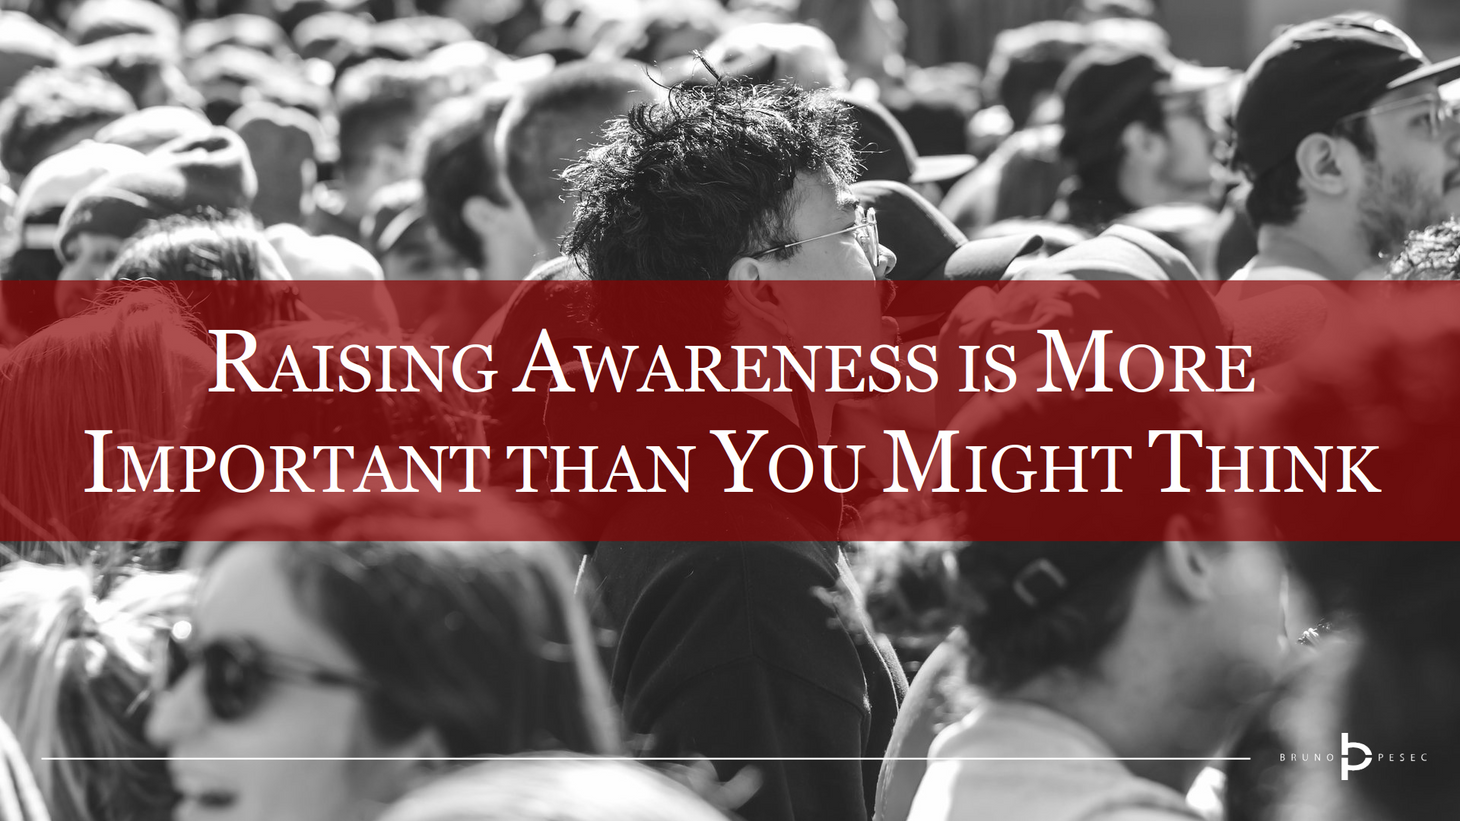 Raising awareness is more important than you might think